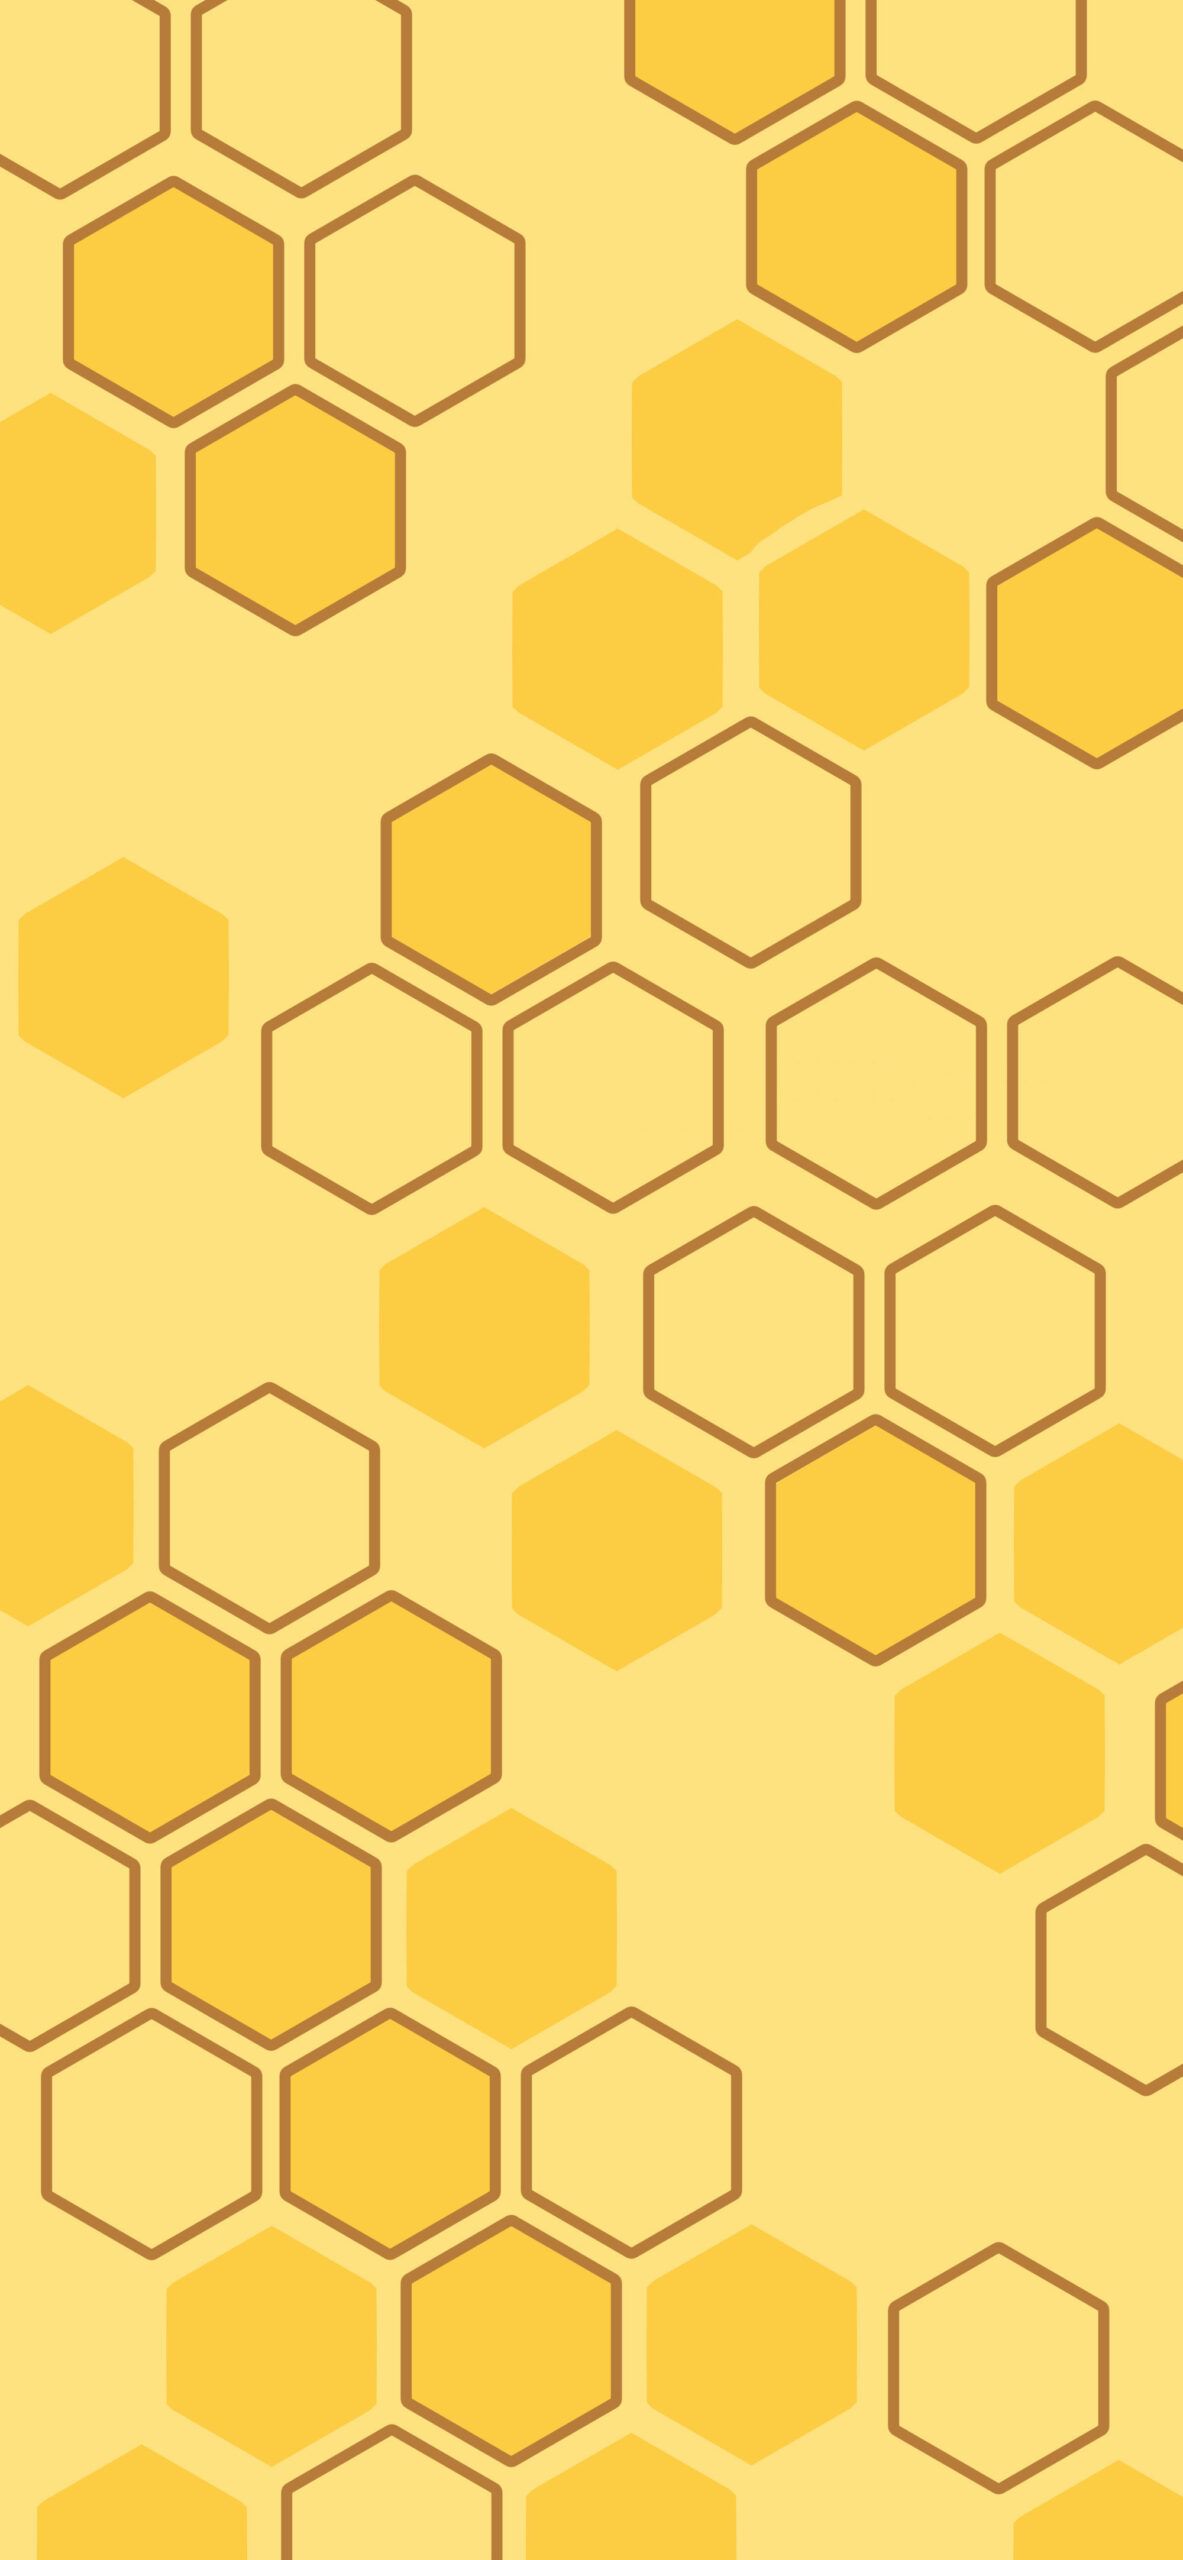 A yellow honeycomb pattern on a light brown background - Bee